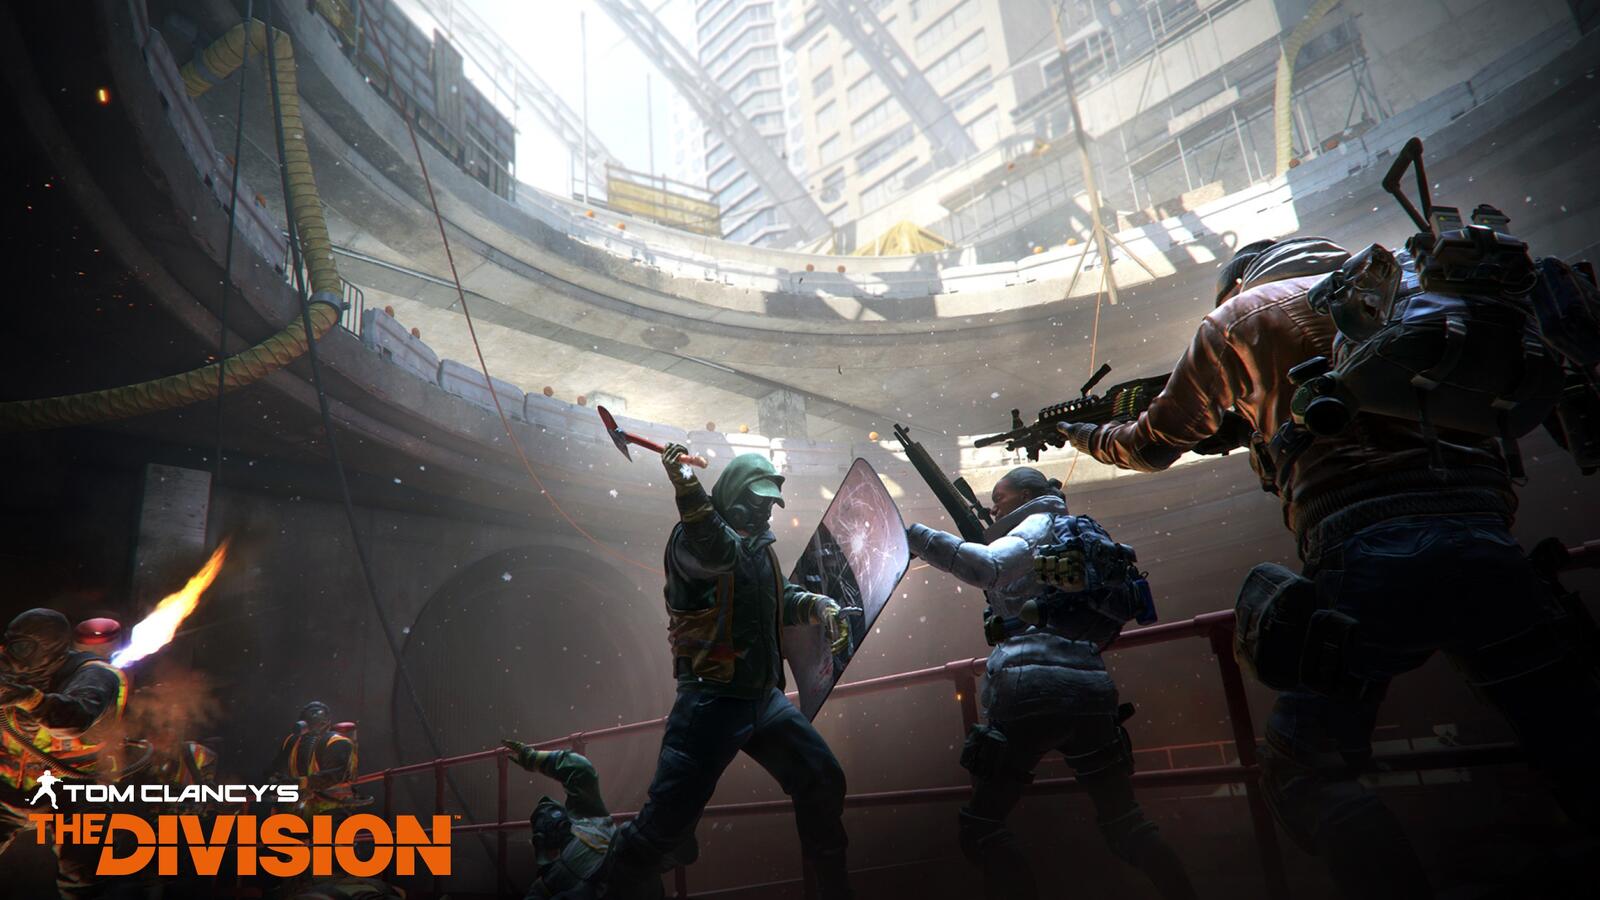 Wallpapers Tom Clancys The Division the battle games on the desktop